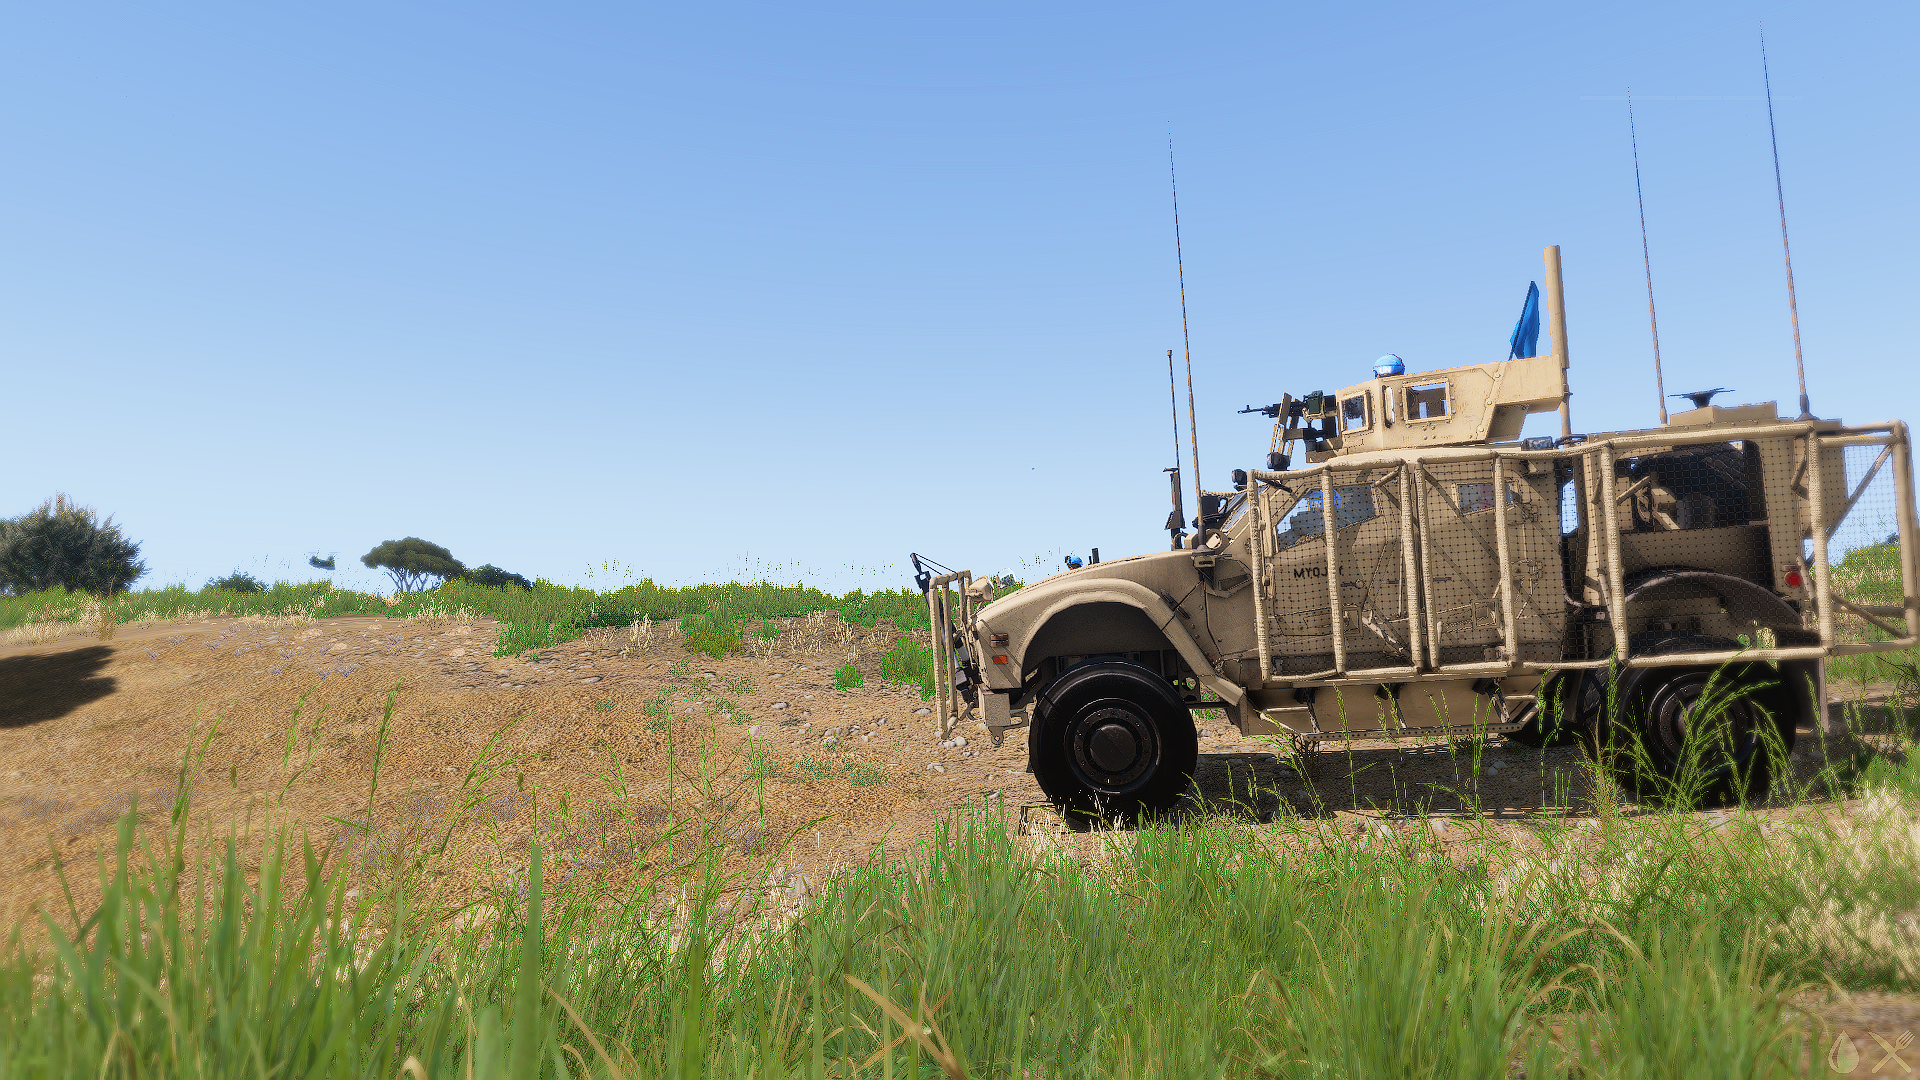 Canadian MRAP under attack by hostile militia forces (off picture). (FICTIONAL)